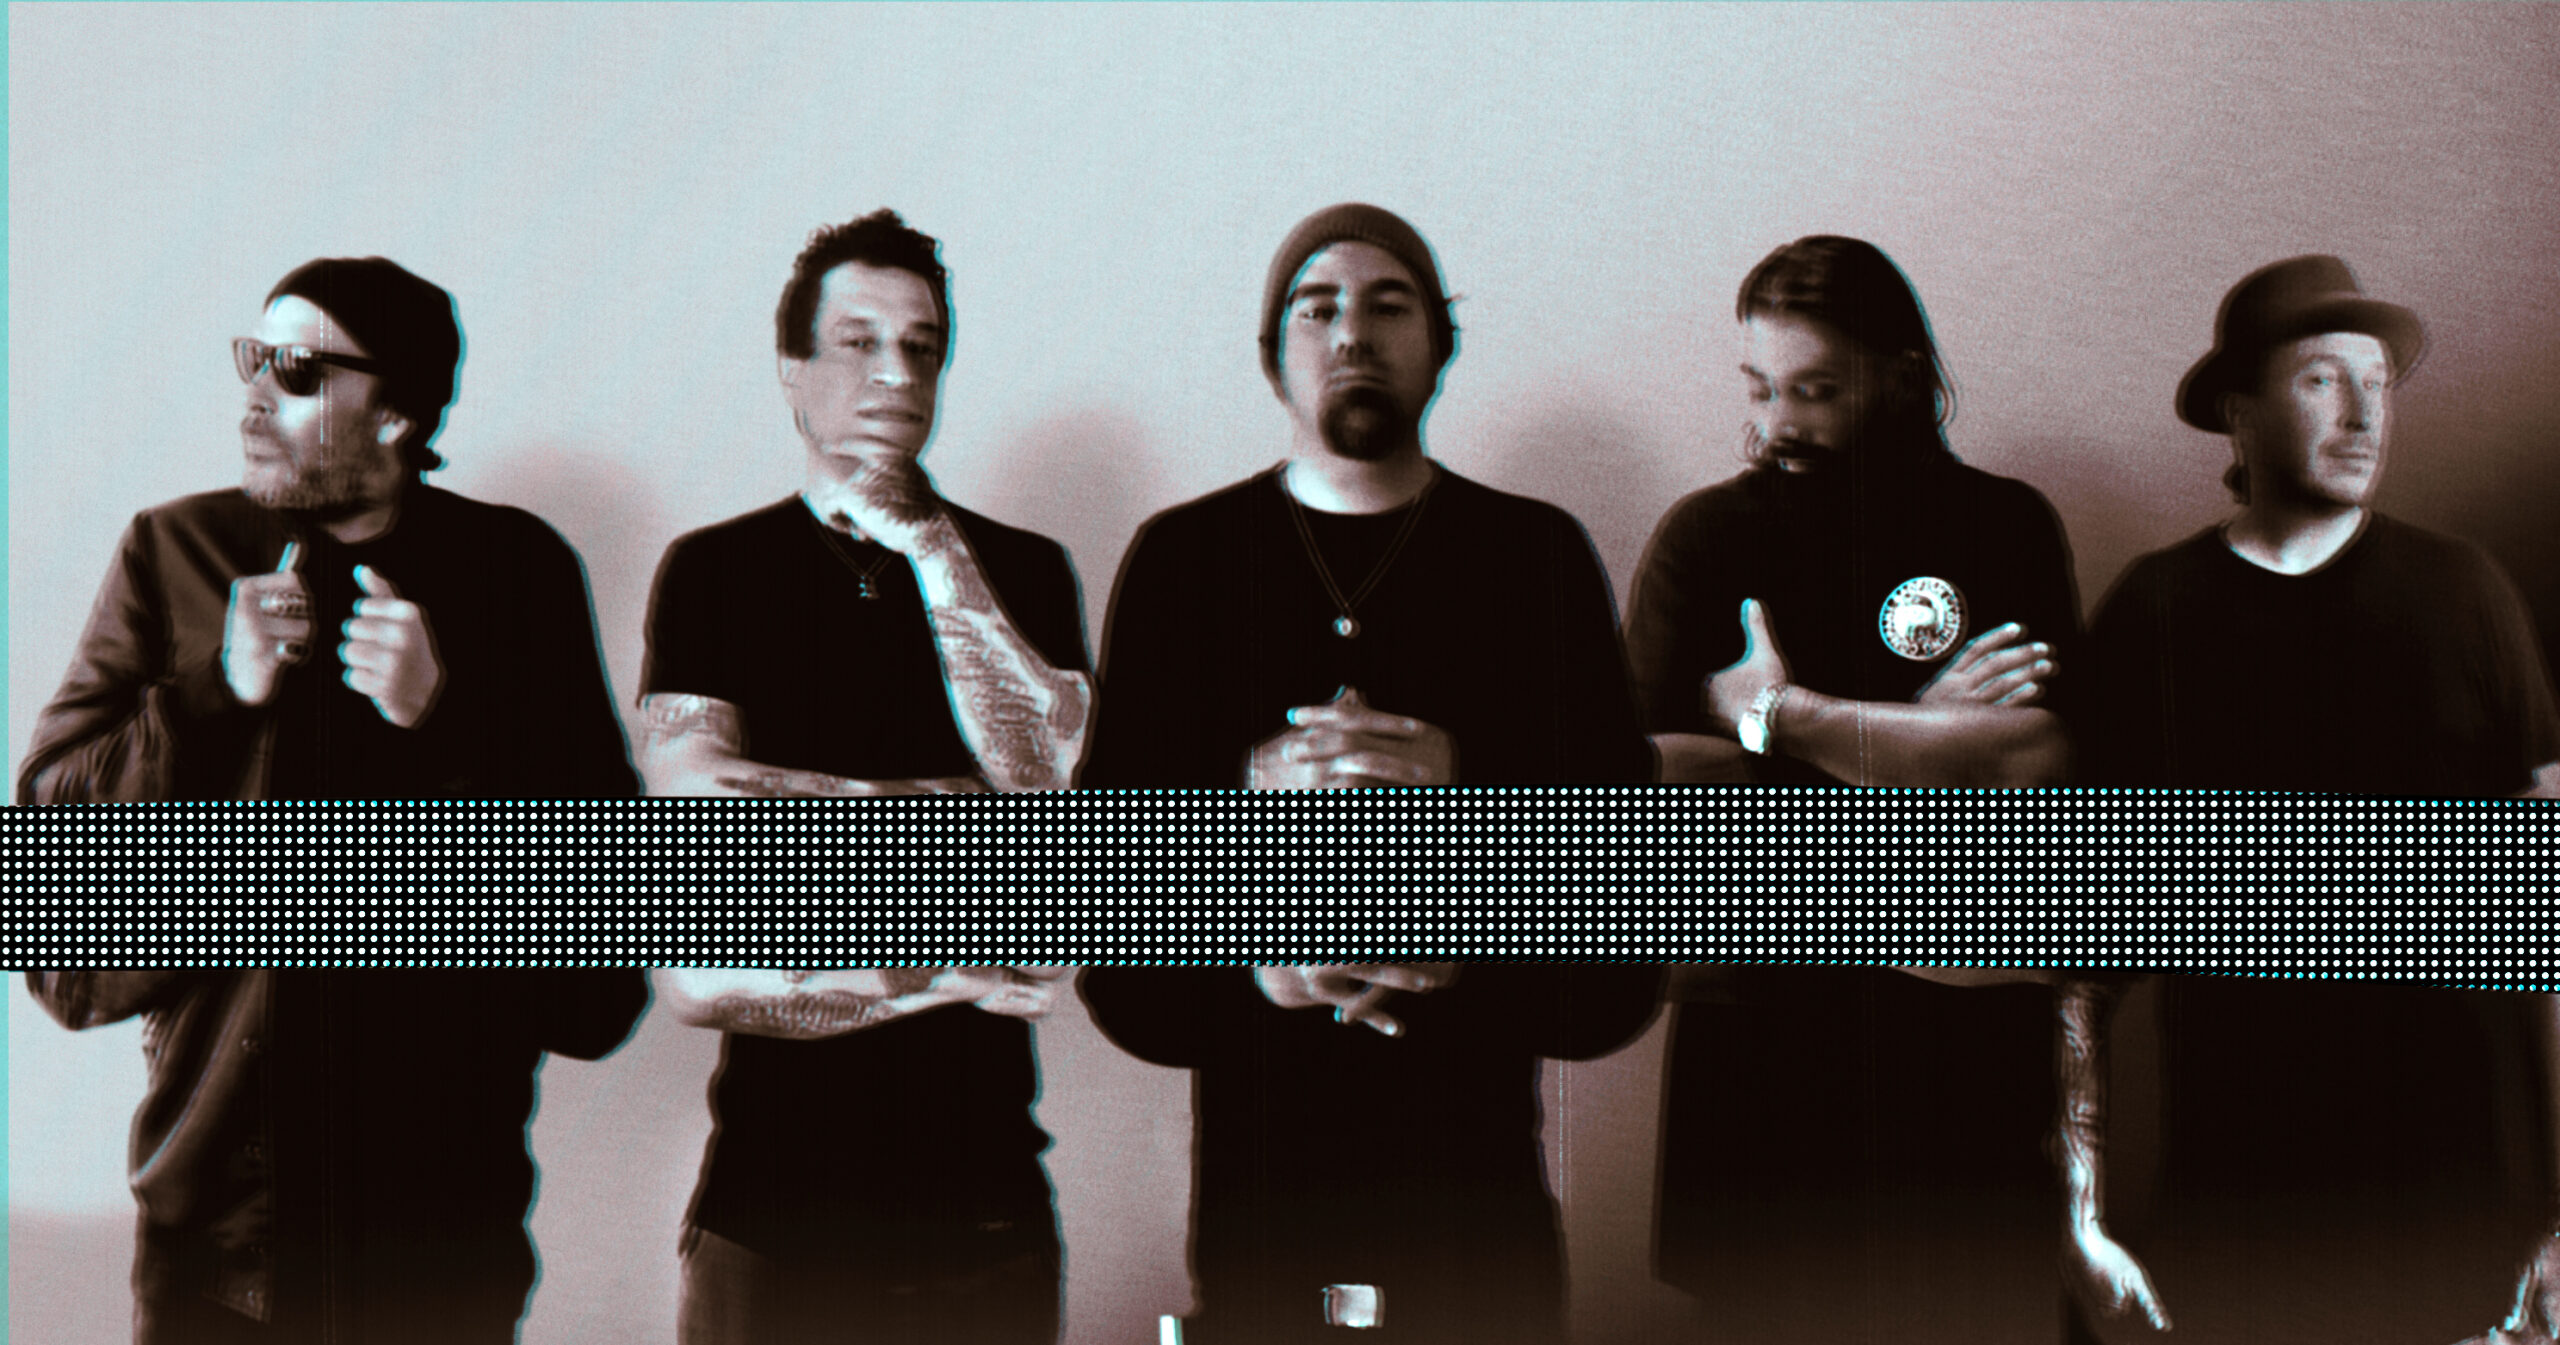 DEFTONES release video for 'Genesis' taken from the new album 'Ohms' out September 25th 1